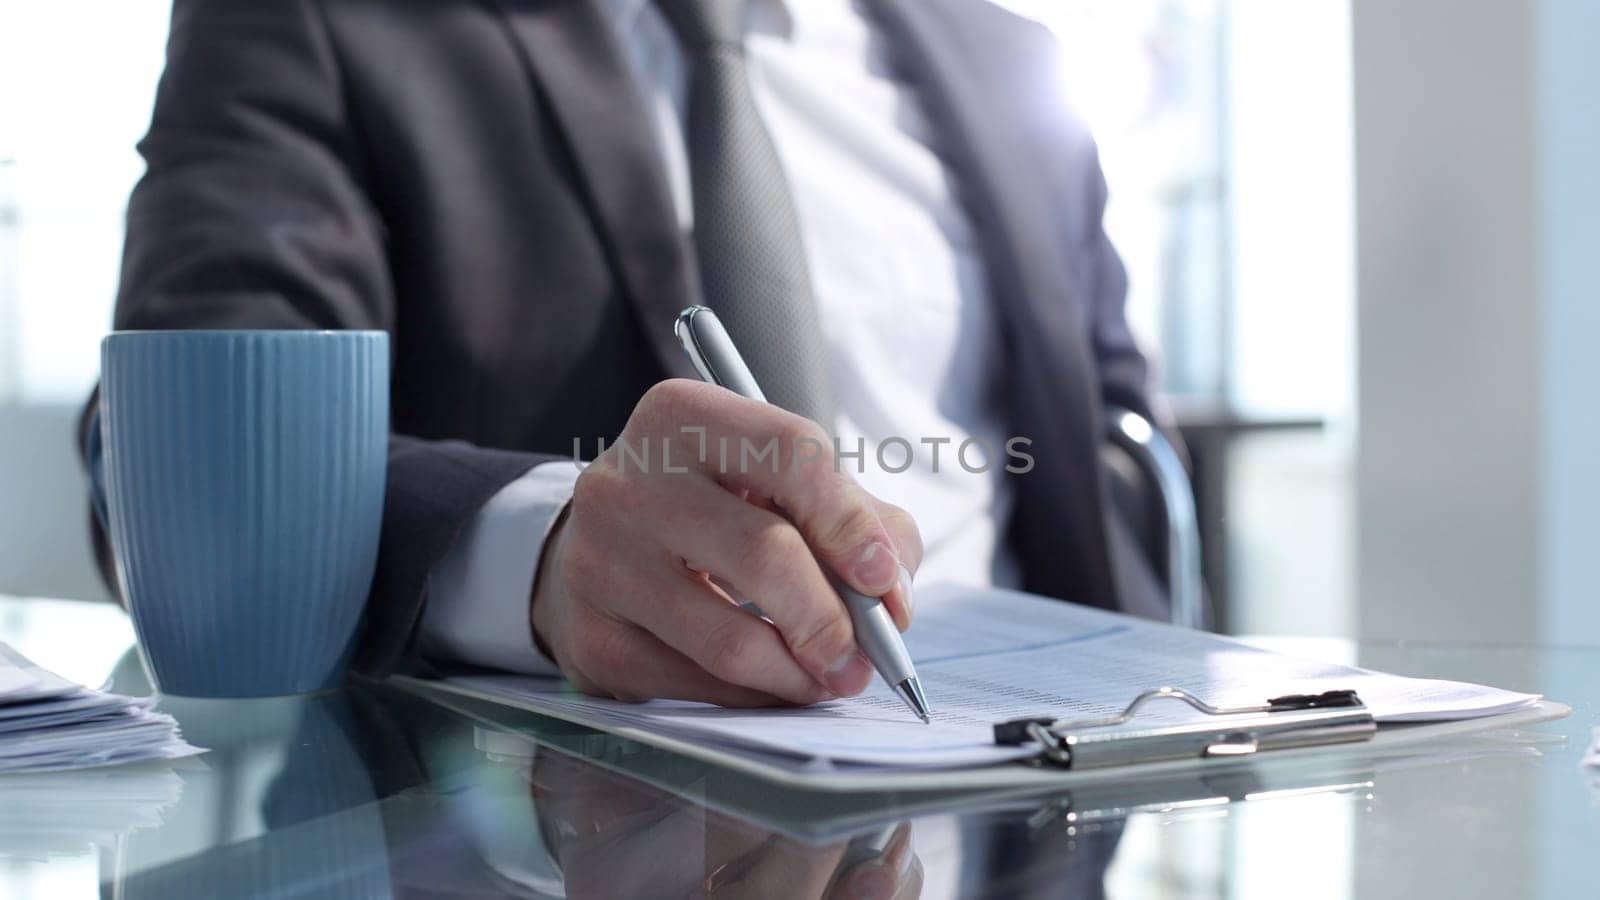 Checking documents for a business meeting by Prosto